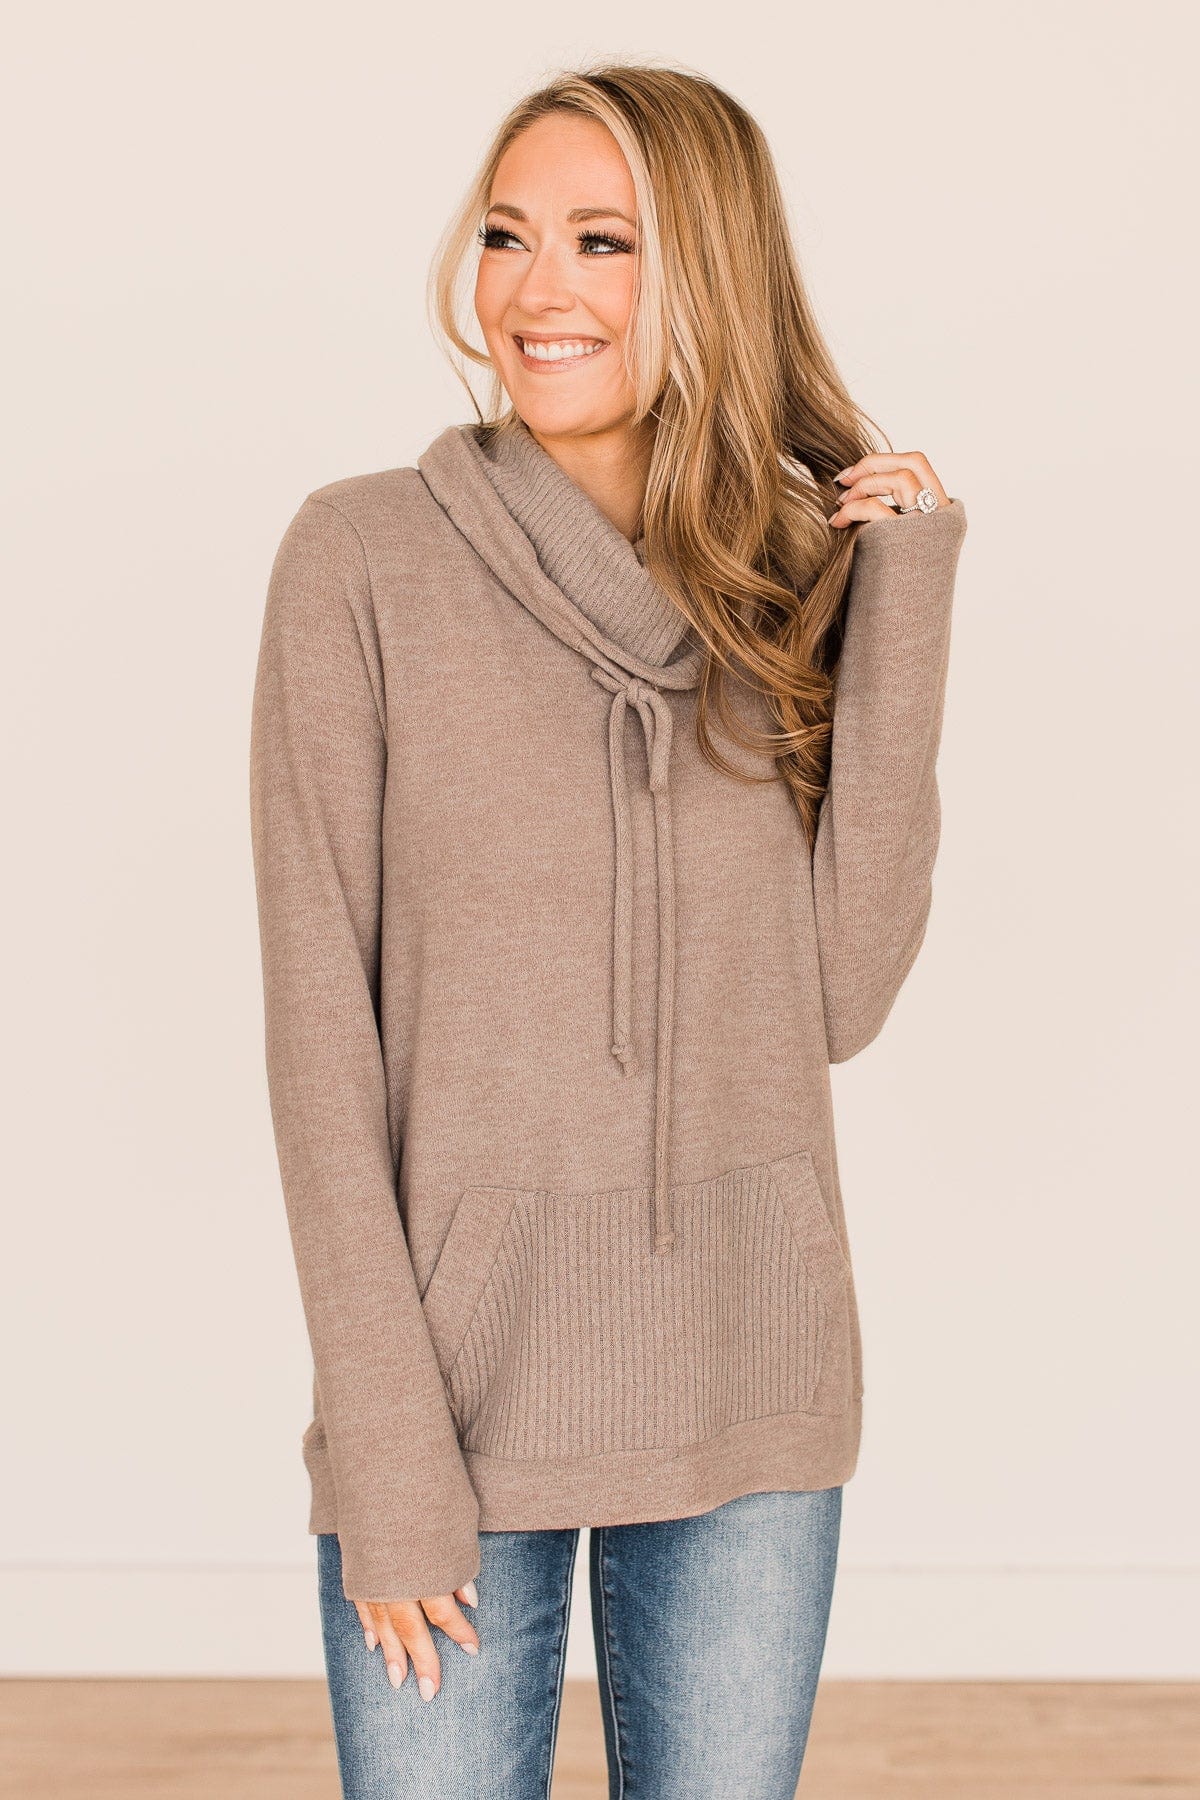 Searching For You Cowl Neck Top- Taupe